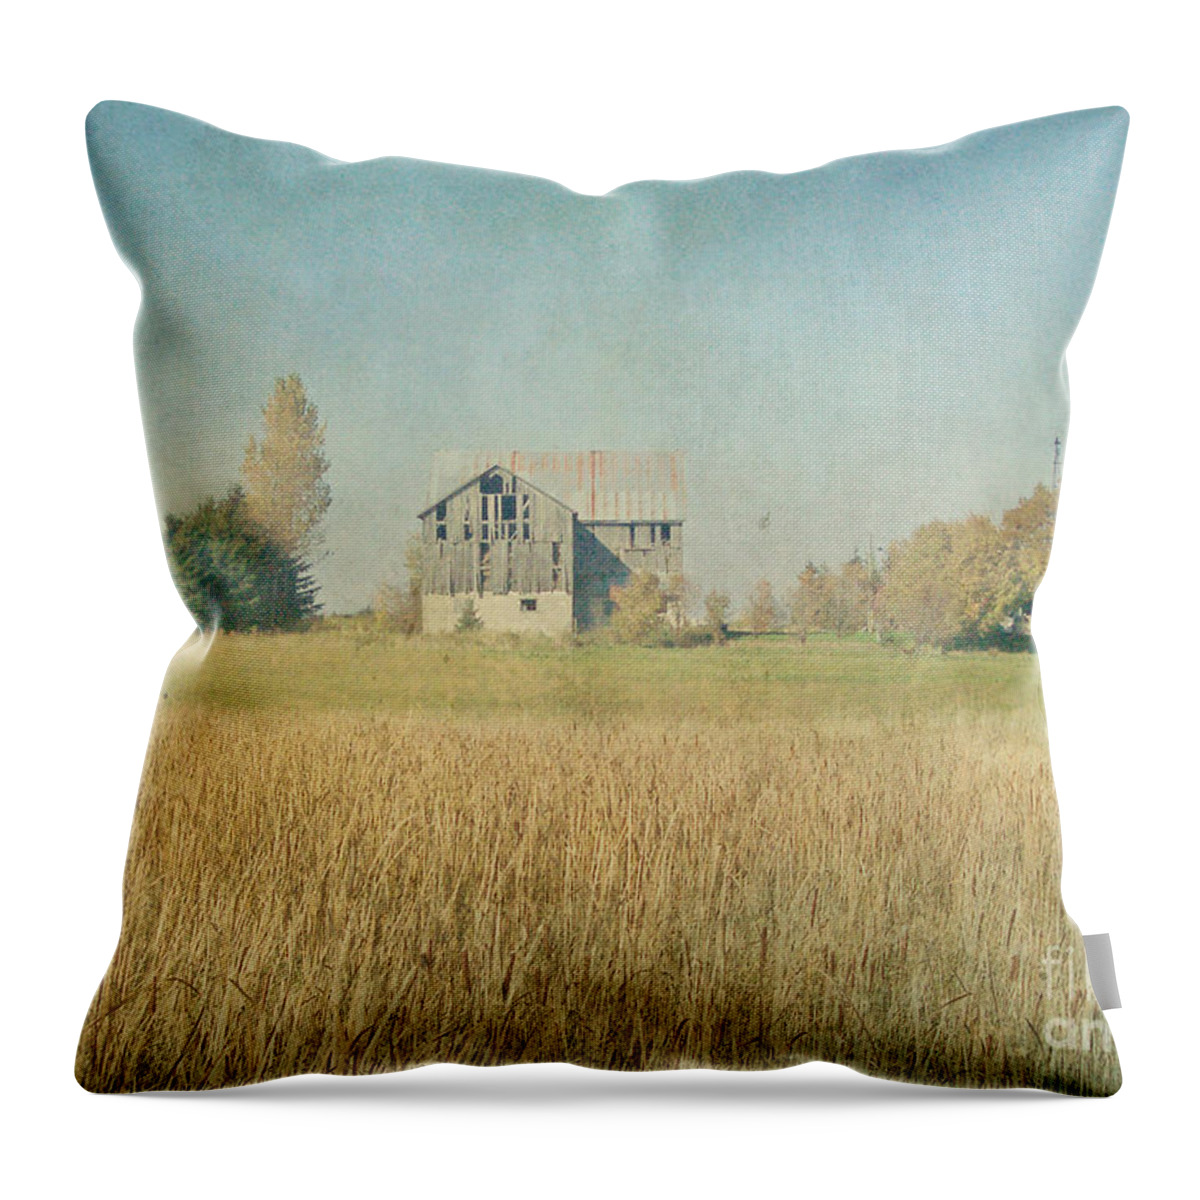 Vintage Inspired Throw Pillow featuring the photograph Farm House by Traci Cottingham